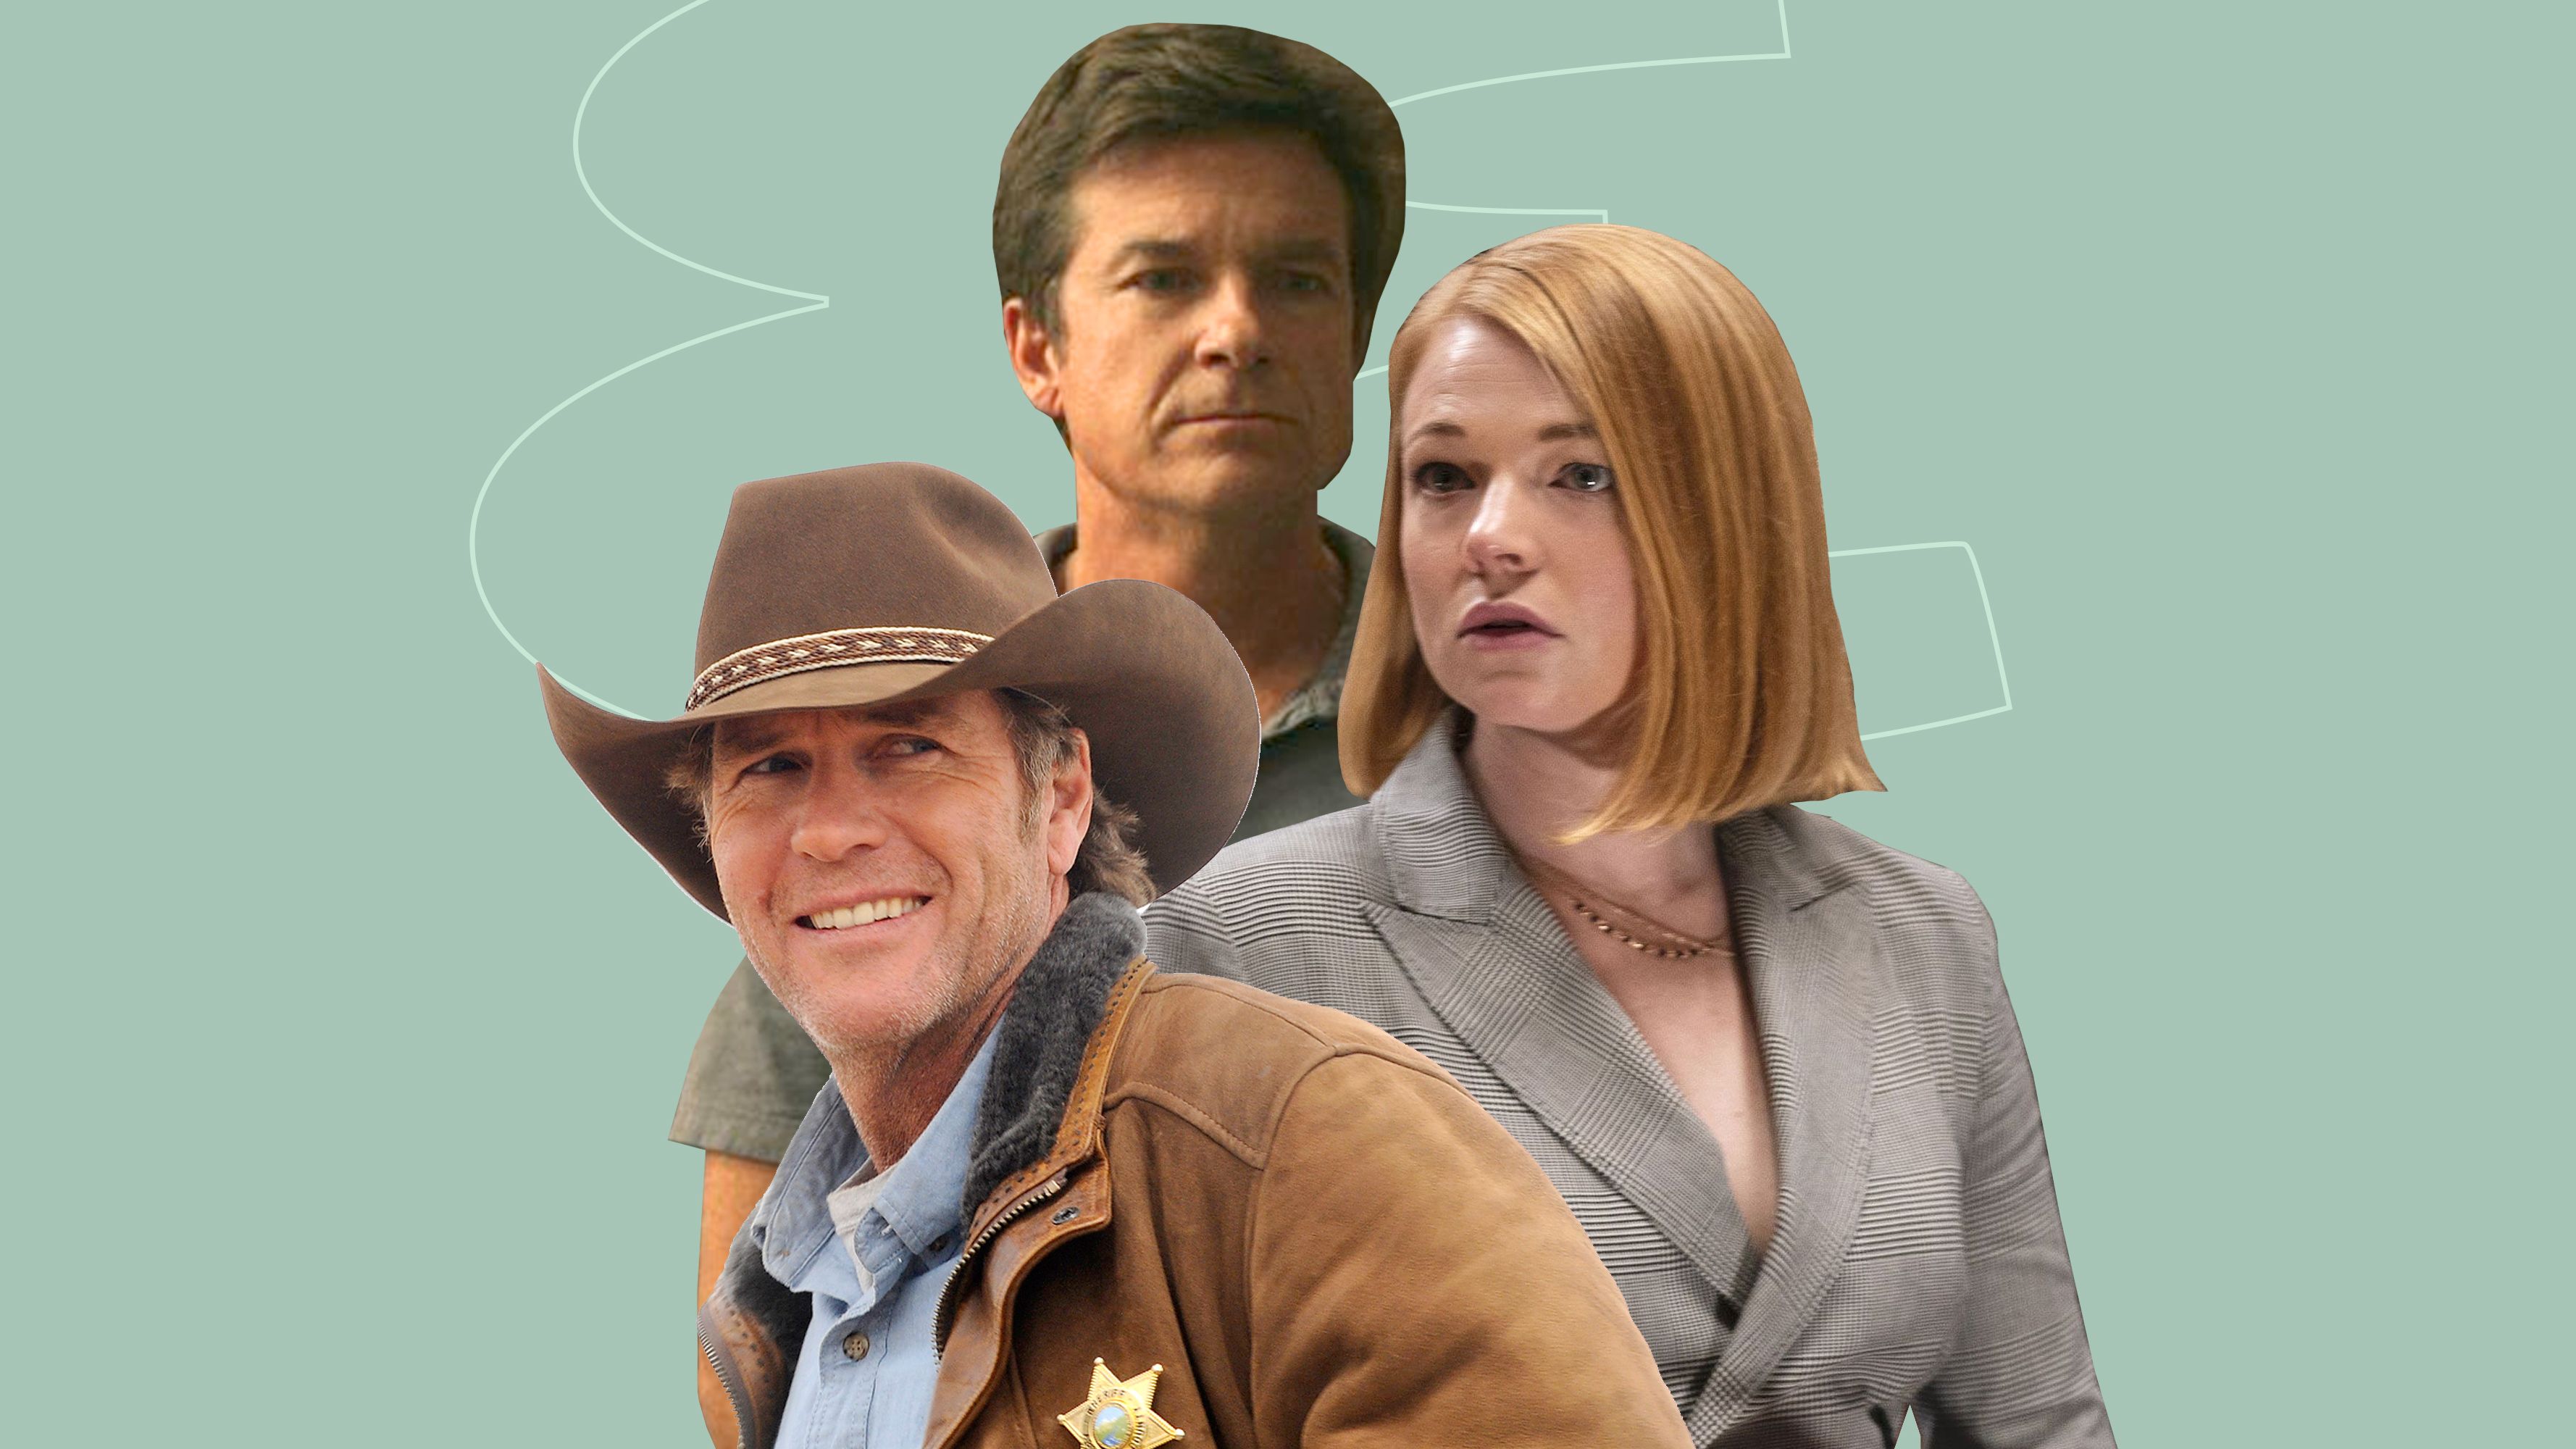 12 Best Western TV Shows to Watch in 2023 - Cowboy Shows